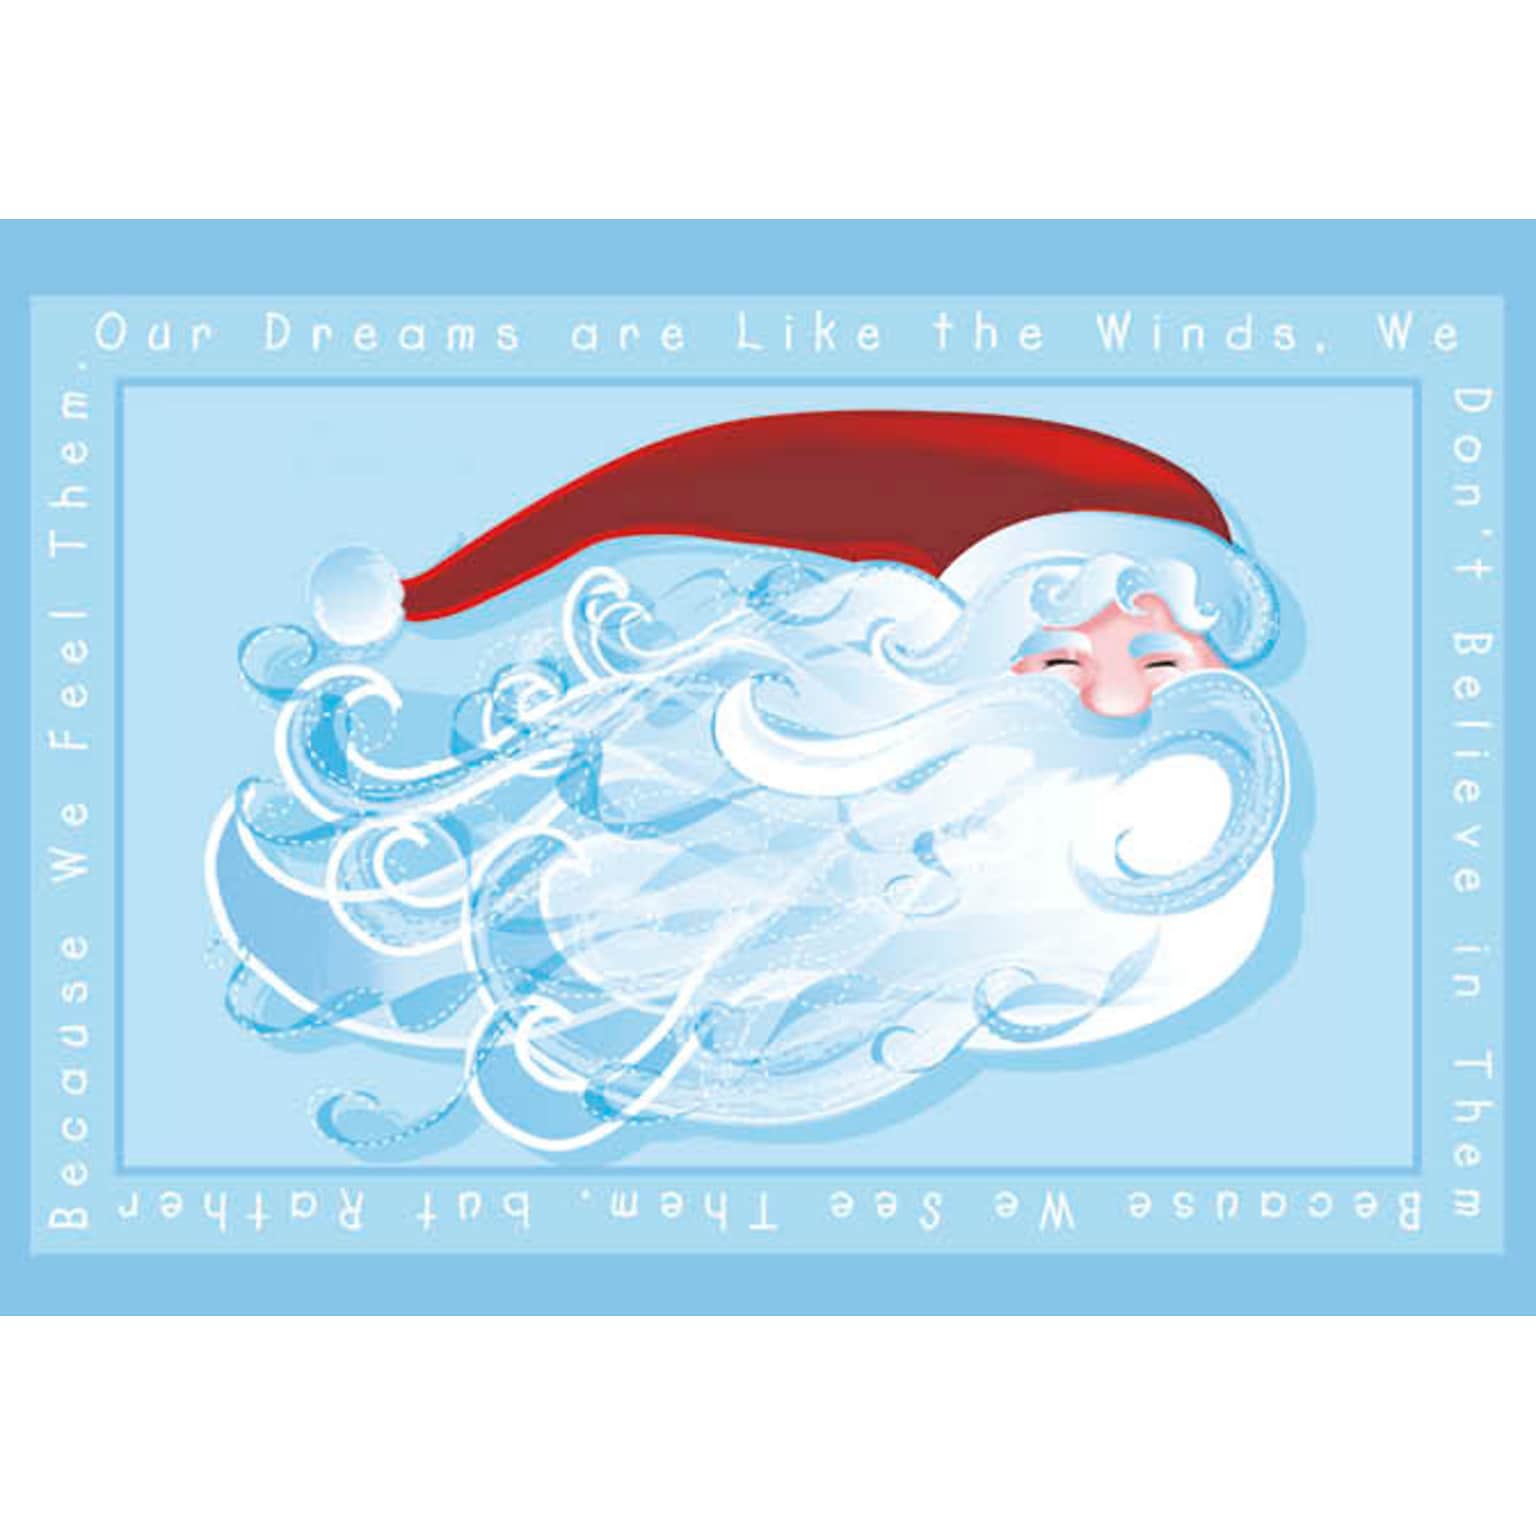 Happy Holidays Dreams Like The Winds Santa Christmas Greeting Cards, With A7 Envelopes, 7 x 5, 25 Cards per Set